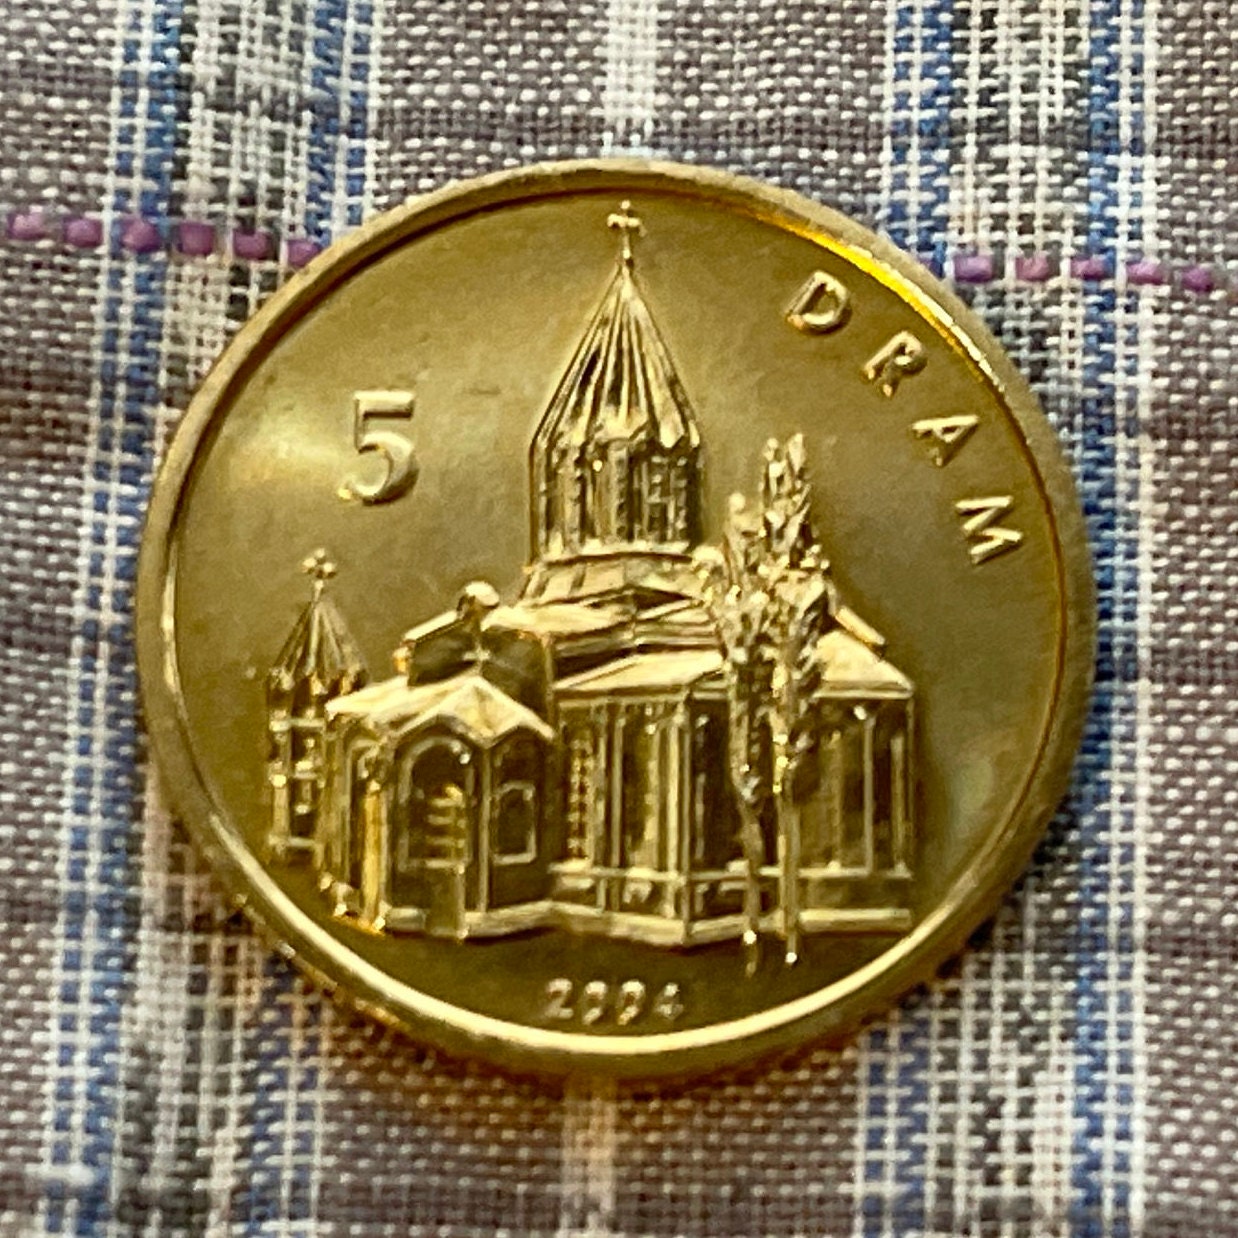 Holy Savior Cathedral 5 Drams Nagorno-Karabakh Authentic Coin Money for Jewelry and Craft Making (Ghazanchetsots) (2004) (Armenian Coin)